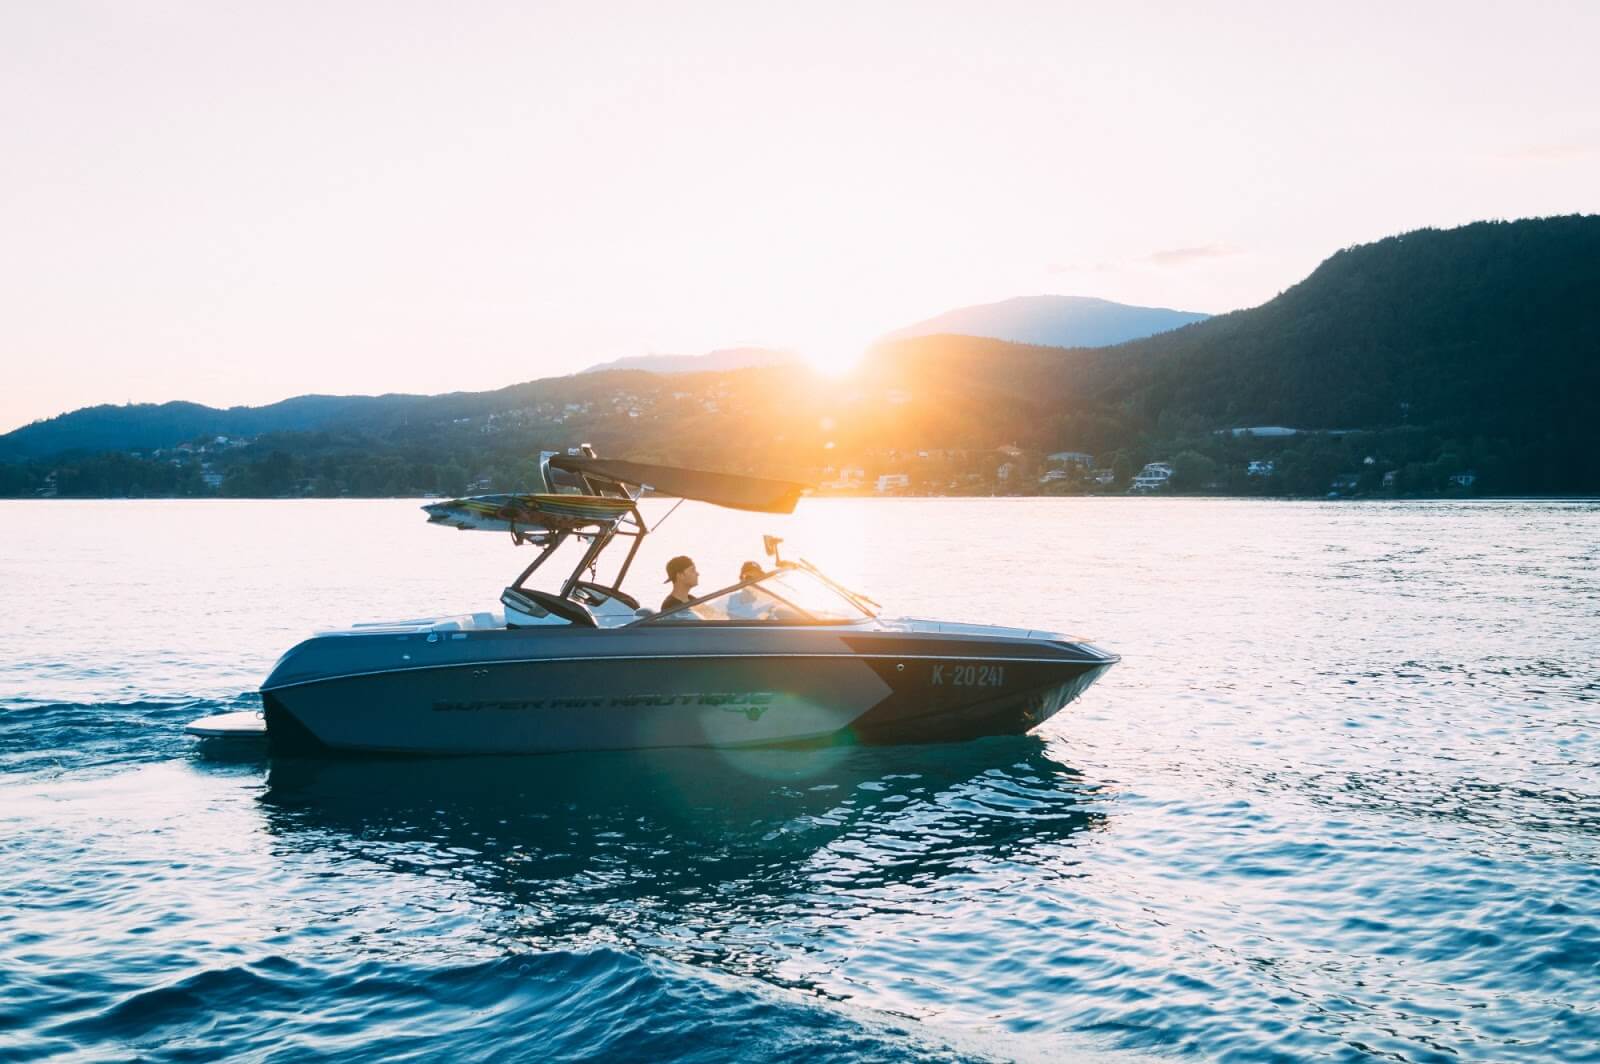 Heading Out on Your Boat? Check These 12 Things First!